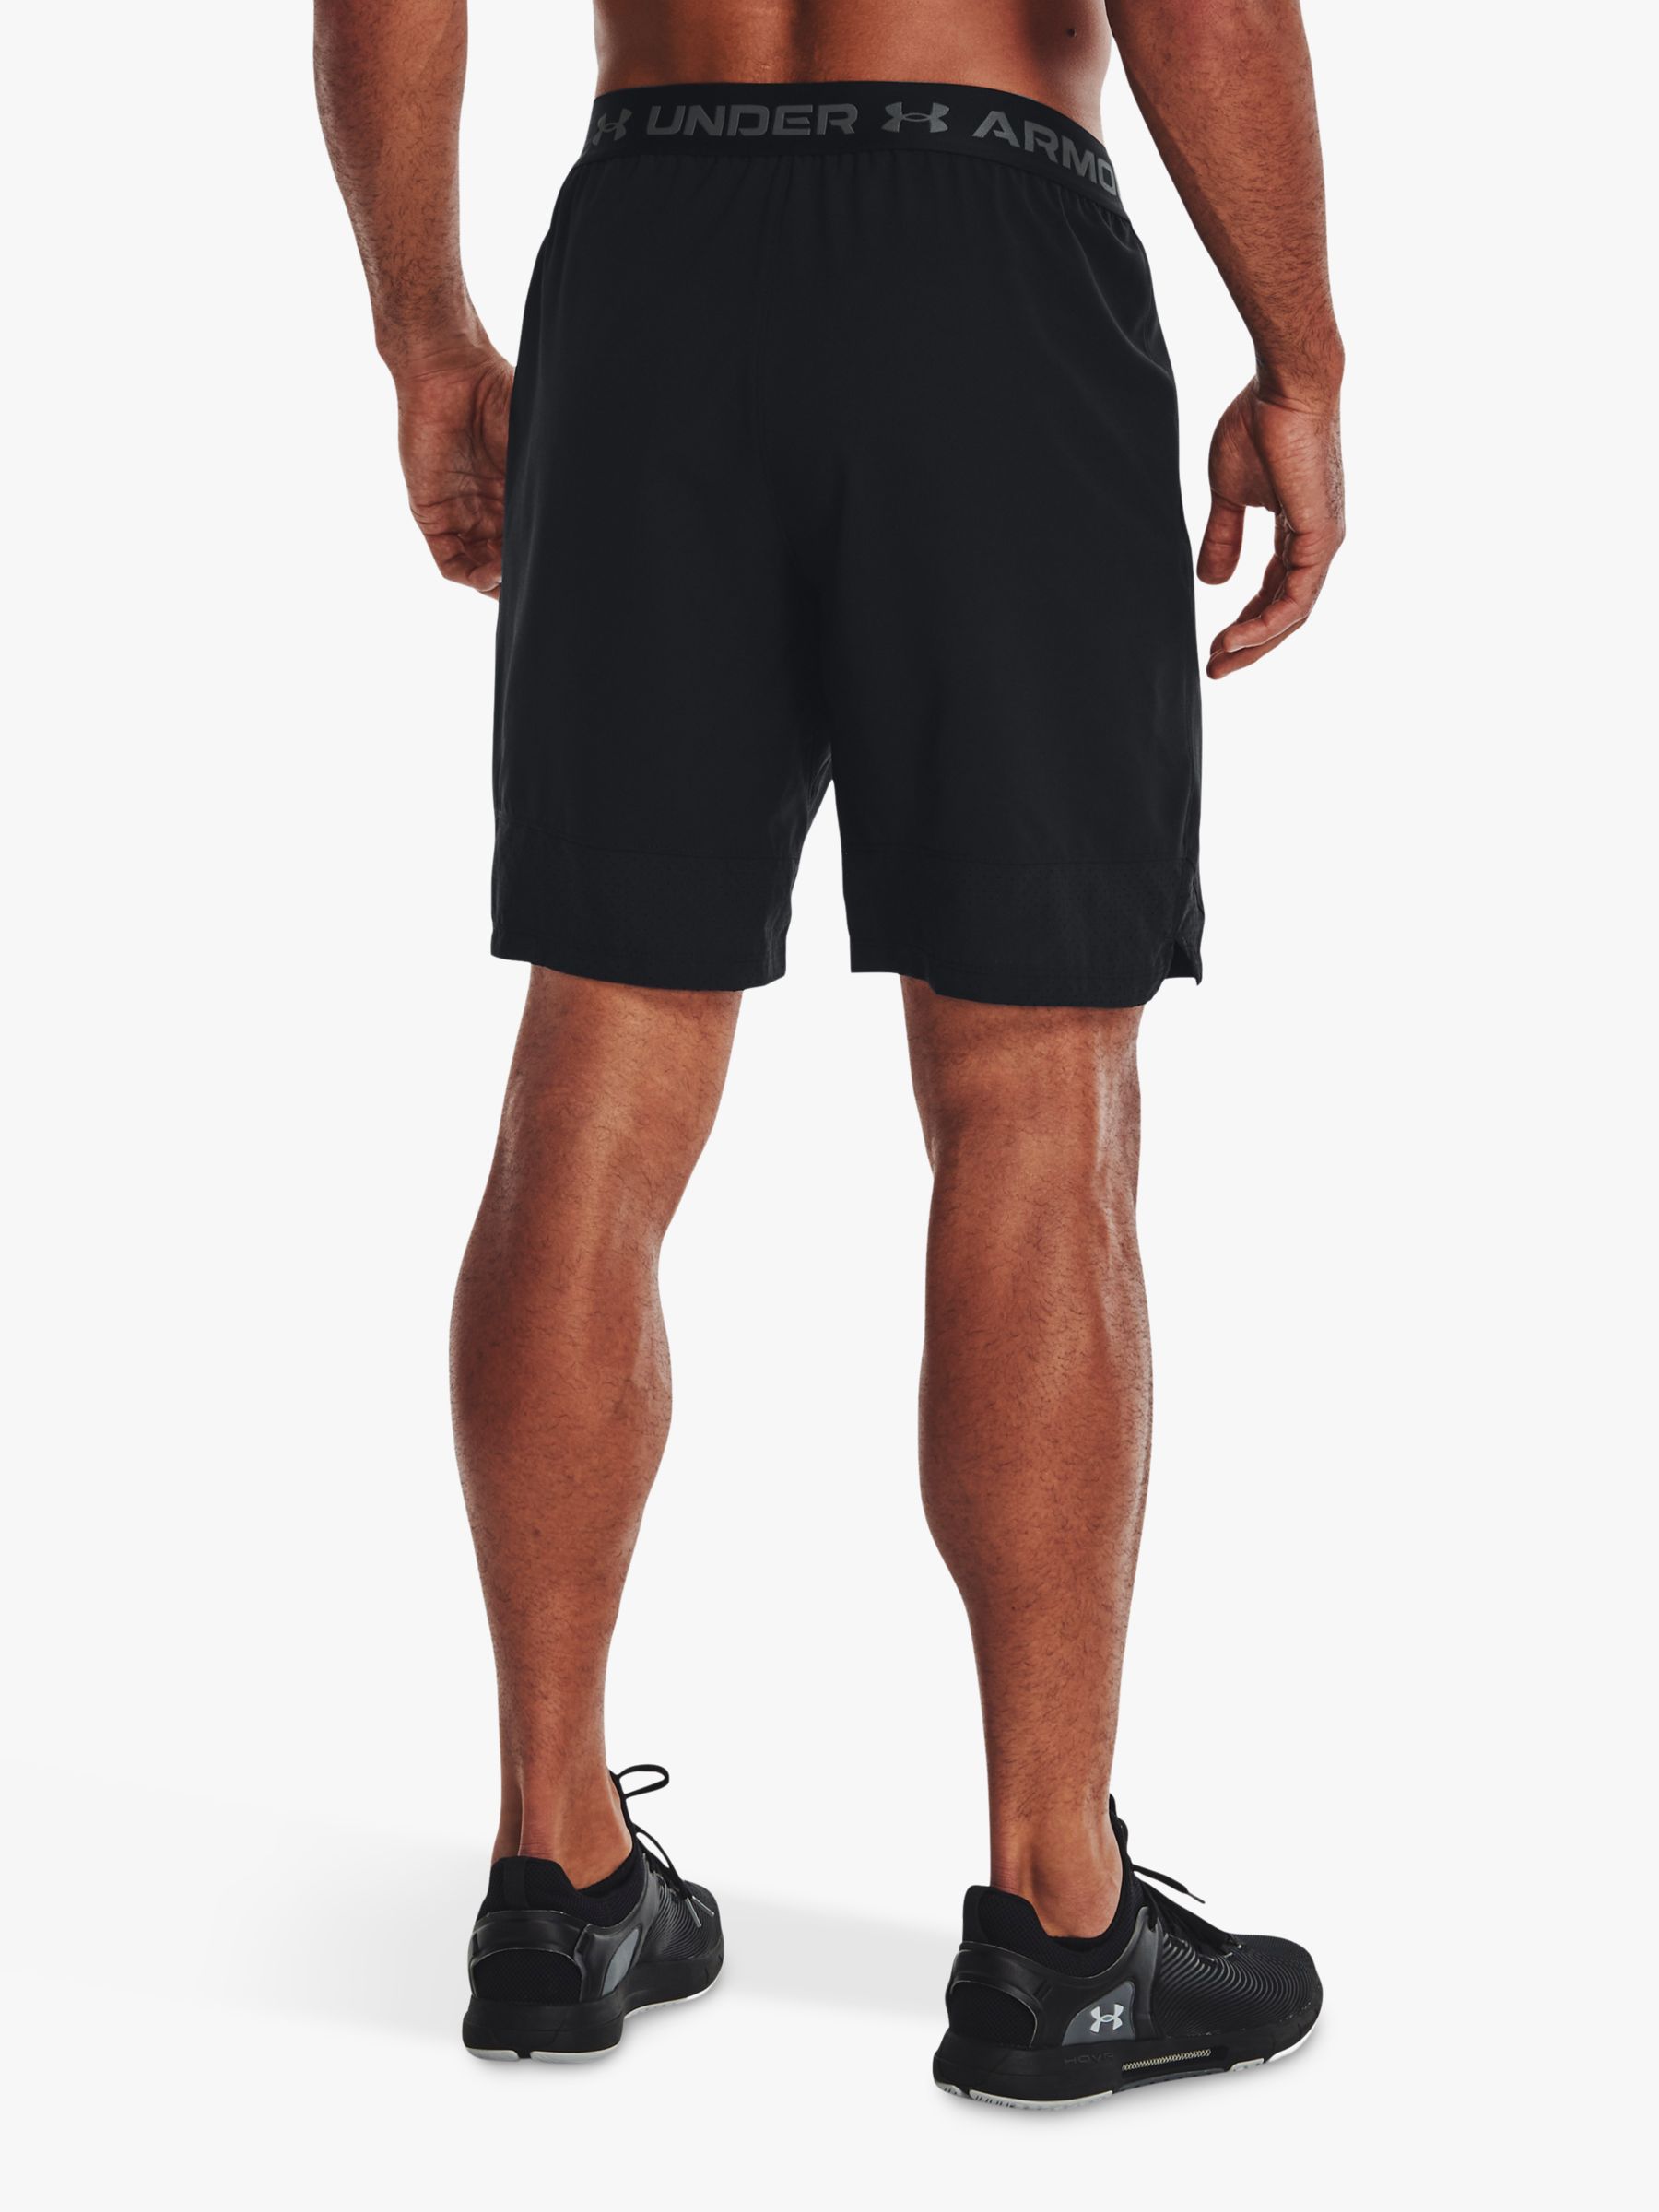 Under Armour Vanish Woven Gym Shorts, Black/Pitch Gray at John Lewis ...